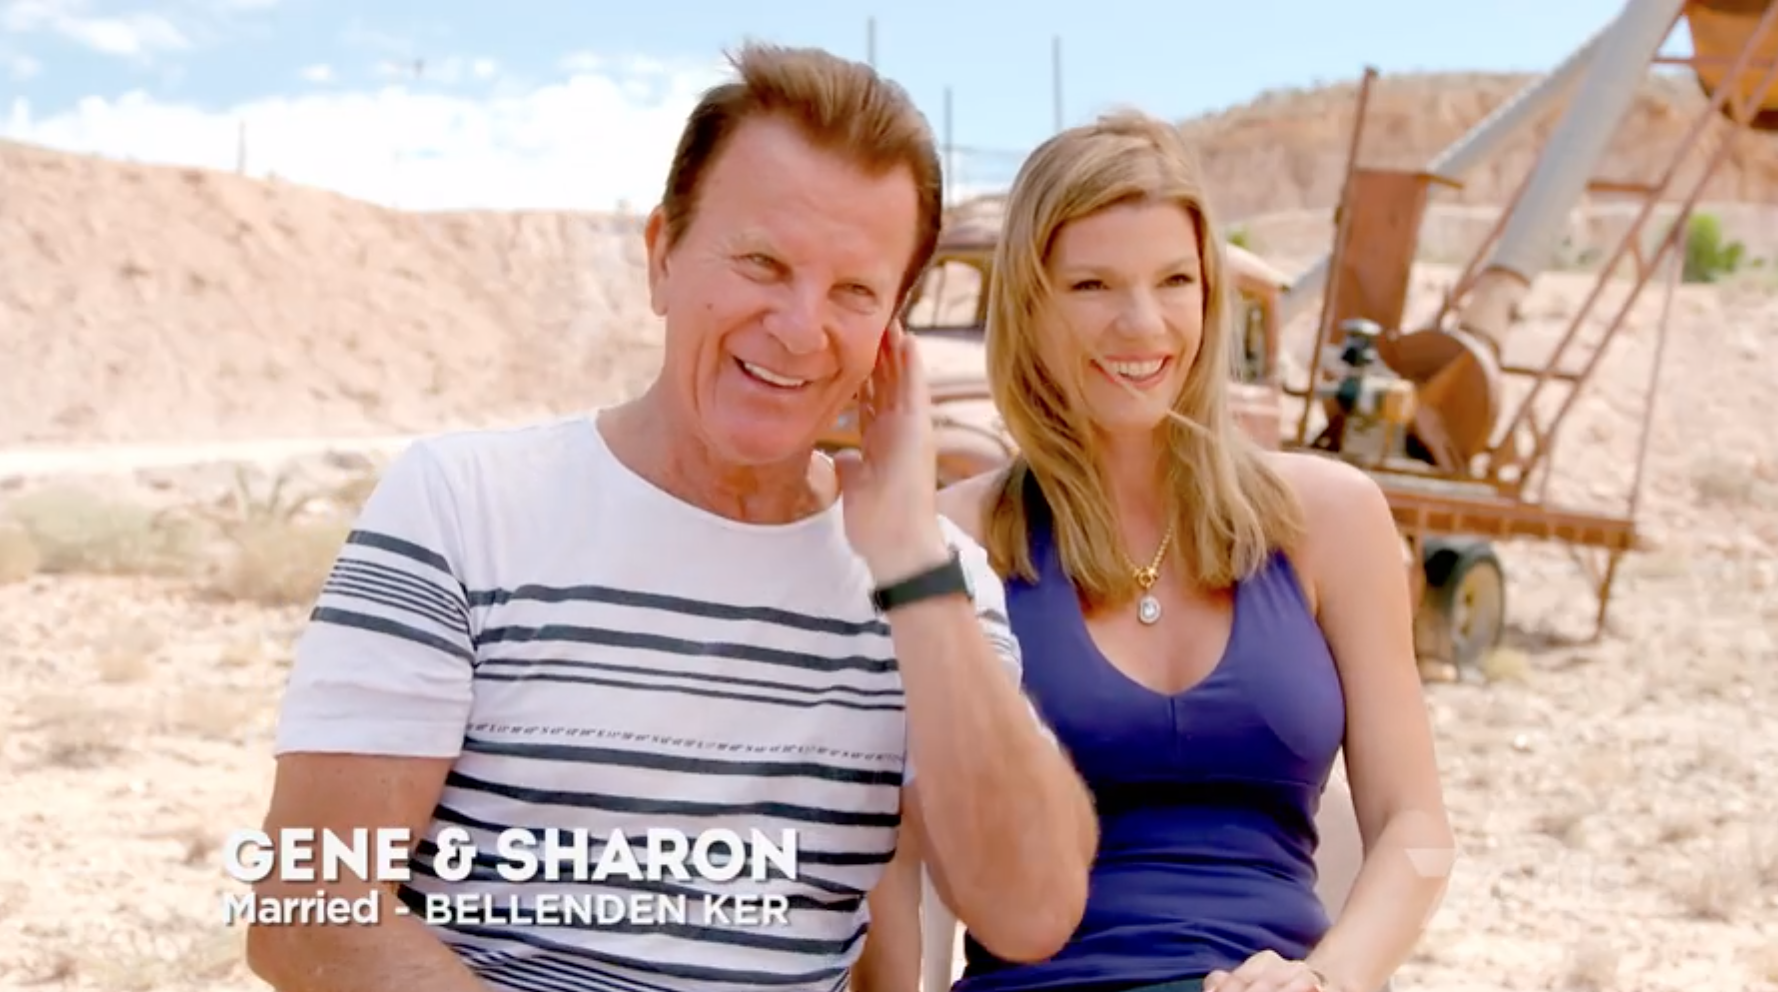 Gene and Sharon Instant Hotel